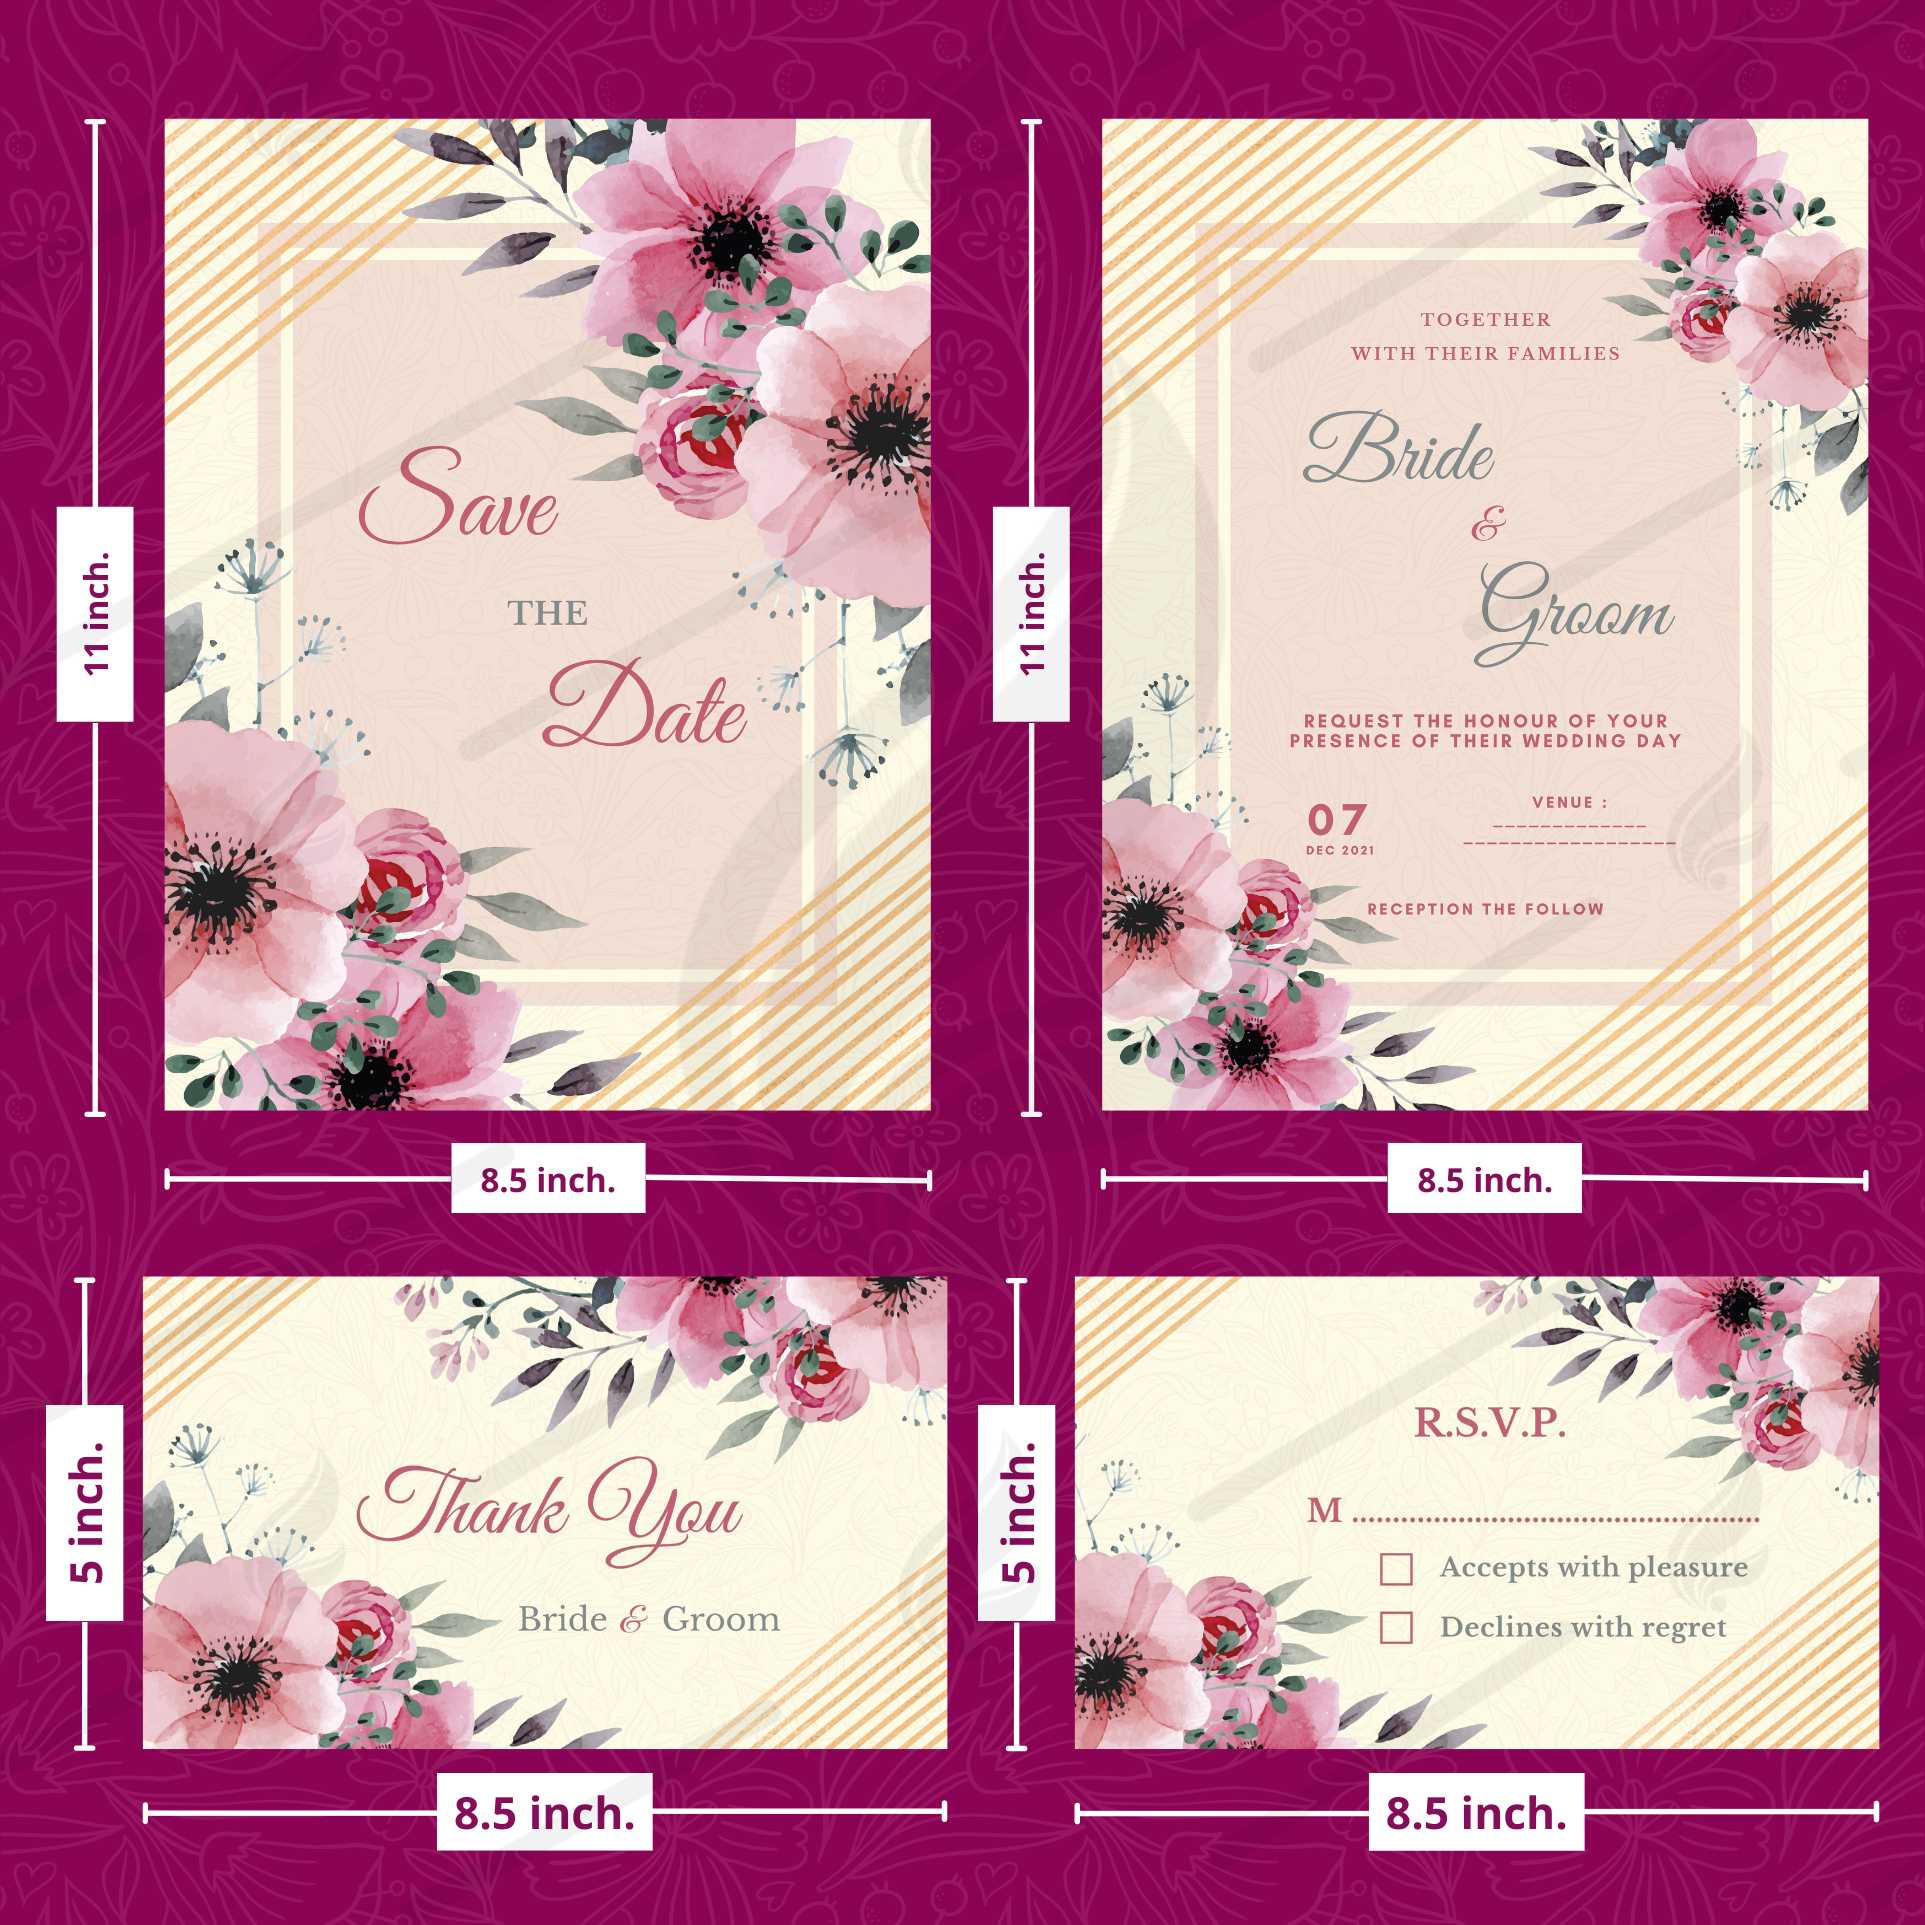 Abstract Floral Wedding Card Template Canva cover image.